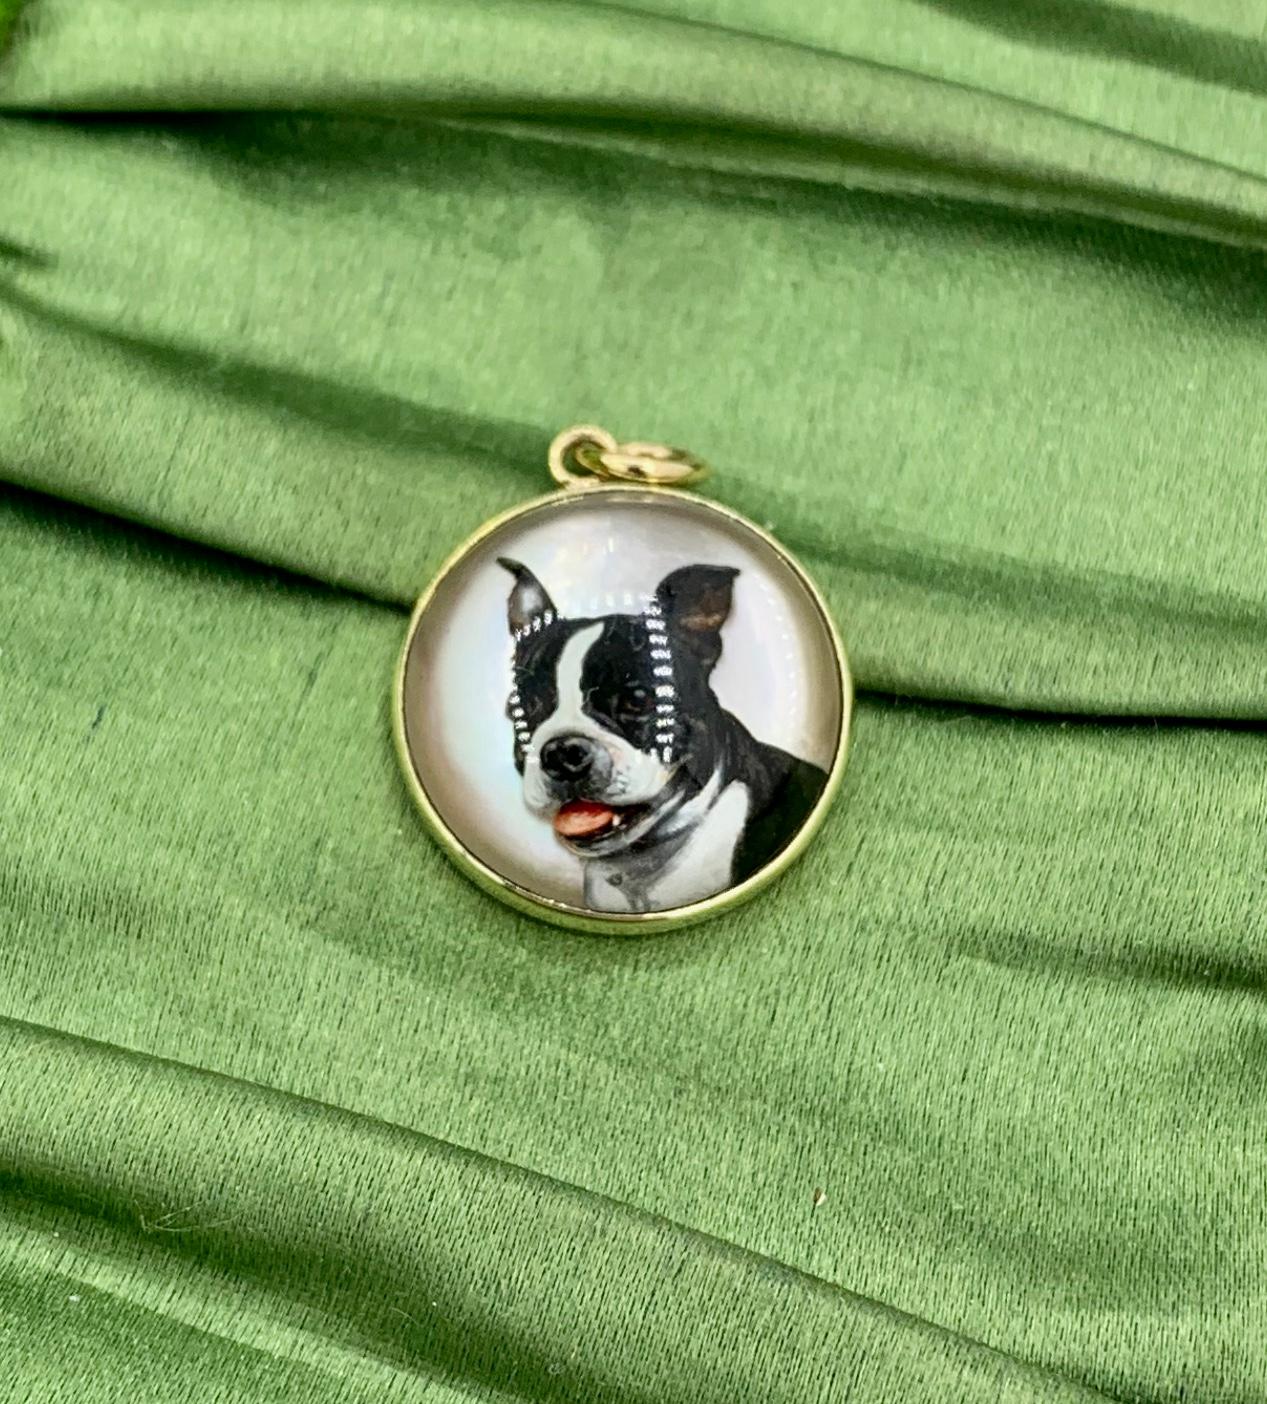 A gorgeous and very rare antique Victorian Essex Crystal, also referred to as a reverse crystal intaglio, Pendant with an exquisitely rendered carved and enamel image of a Boston Terrier or French Bulldog Dog in 14 Karat Gold.  The Essex Crystal